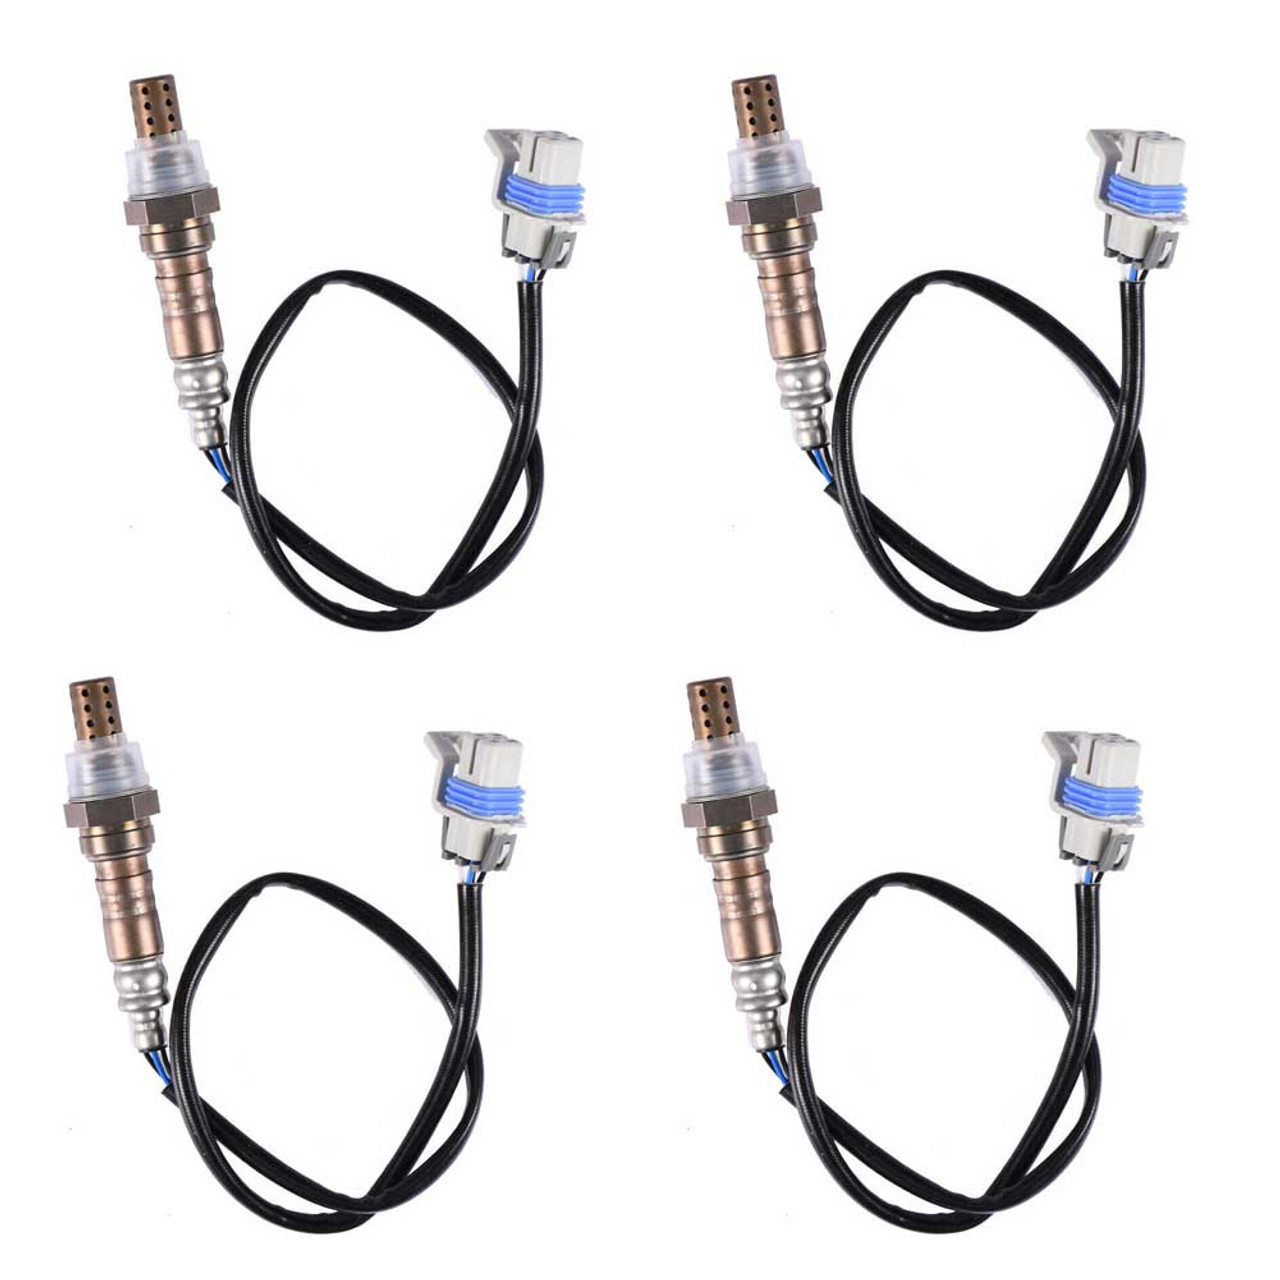 O2 Oxygen Sensor Replacement 4pc Set for GM Vehicles (2000-2004 ...